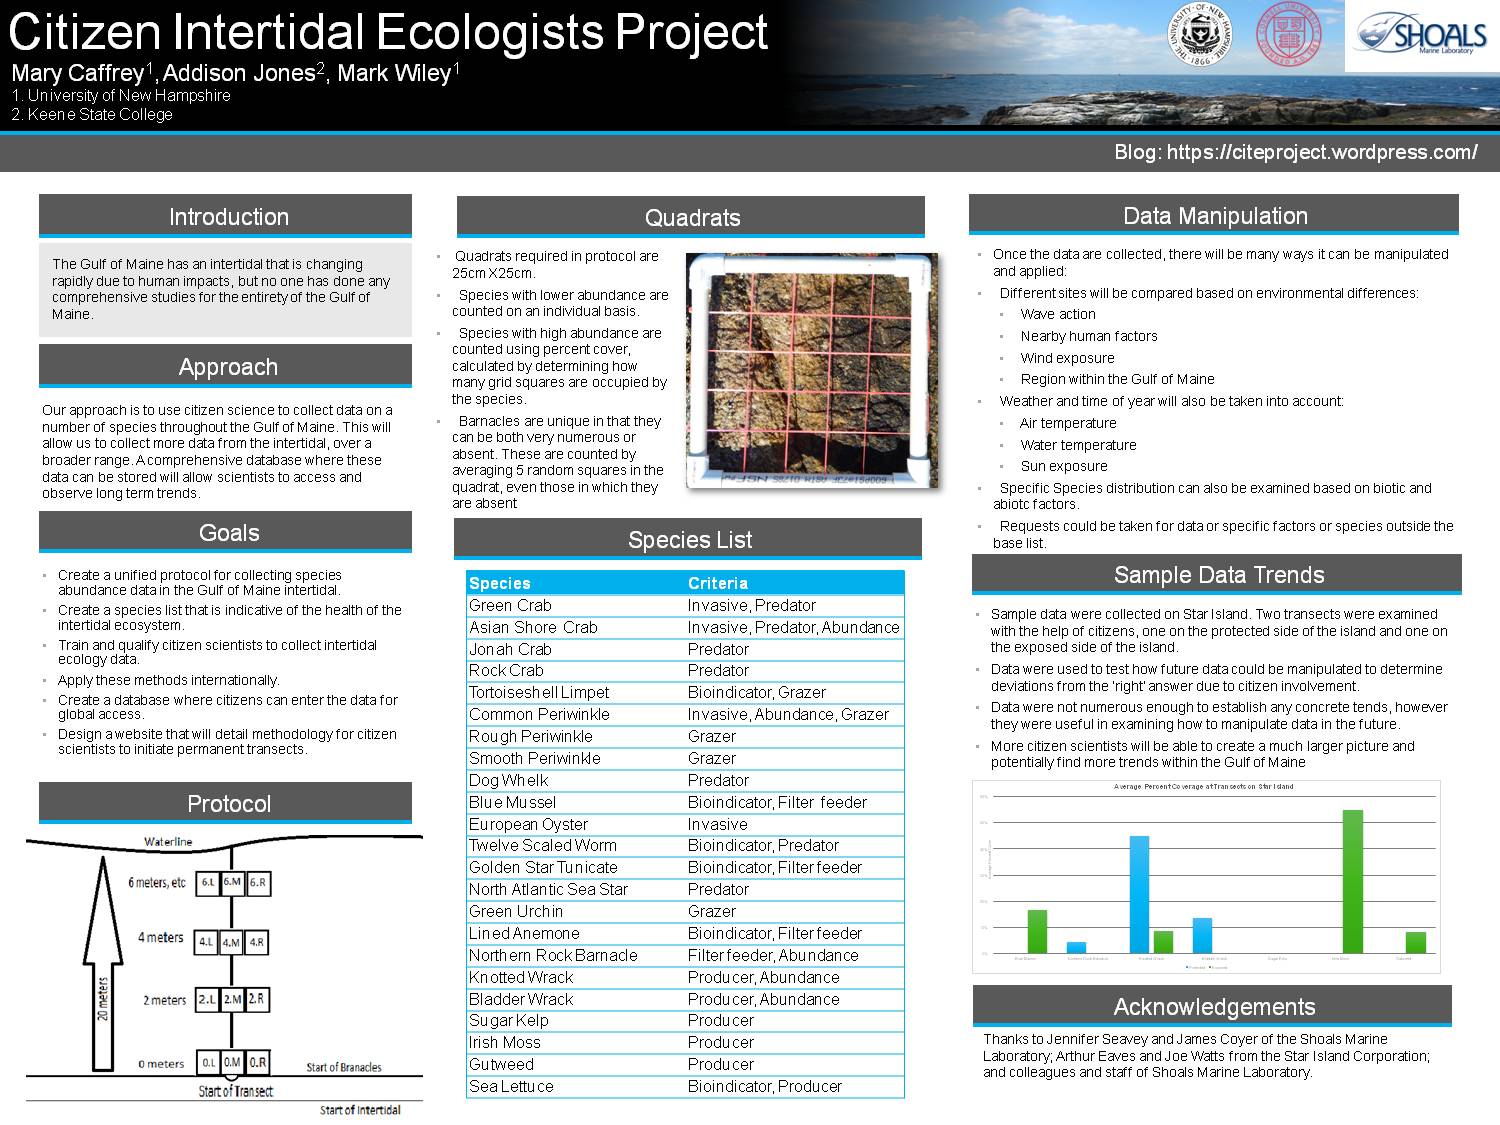 Citizens Intertidal Ecology Project by jacoyer